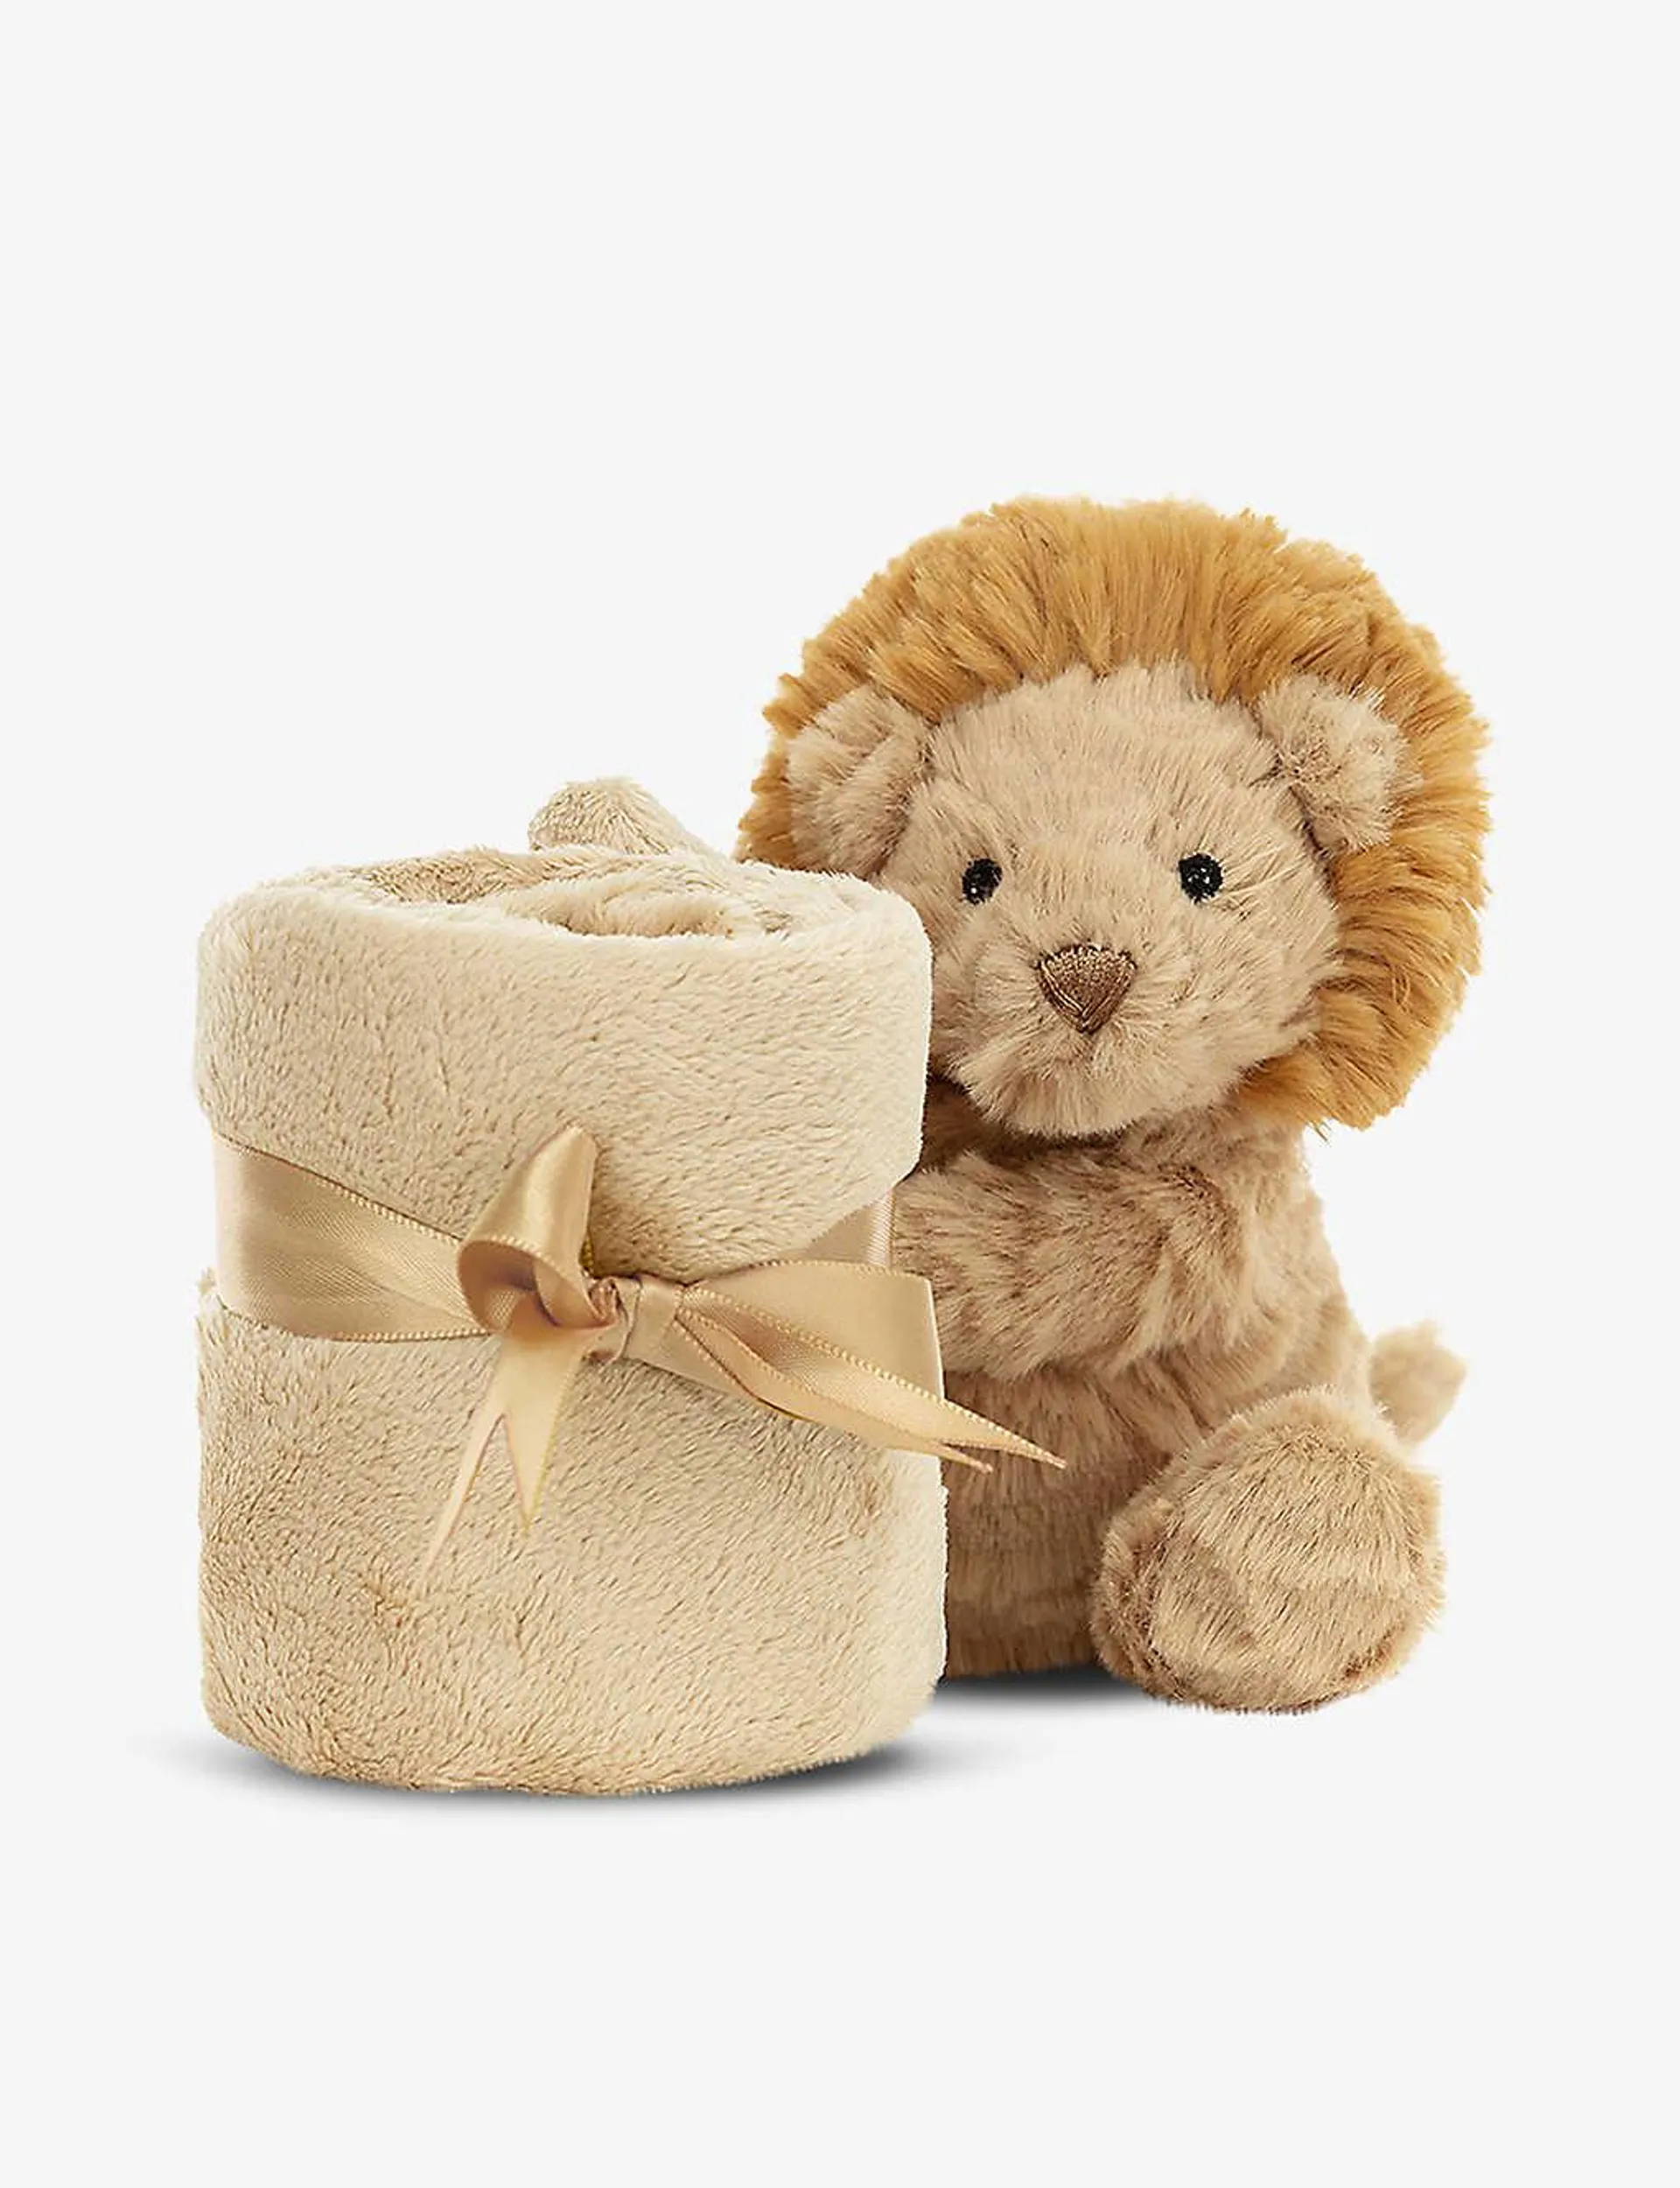 Fuddlewuddle Lion soft toy soother 3cm